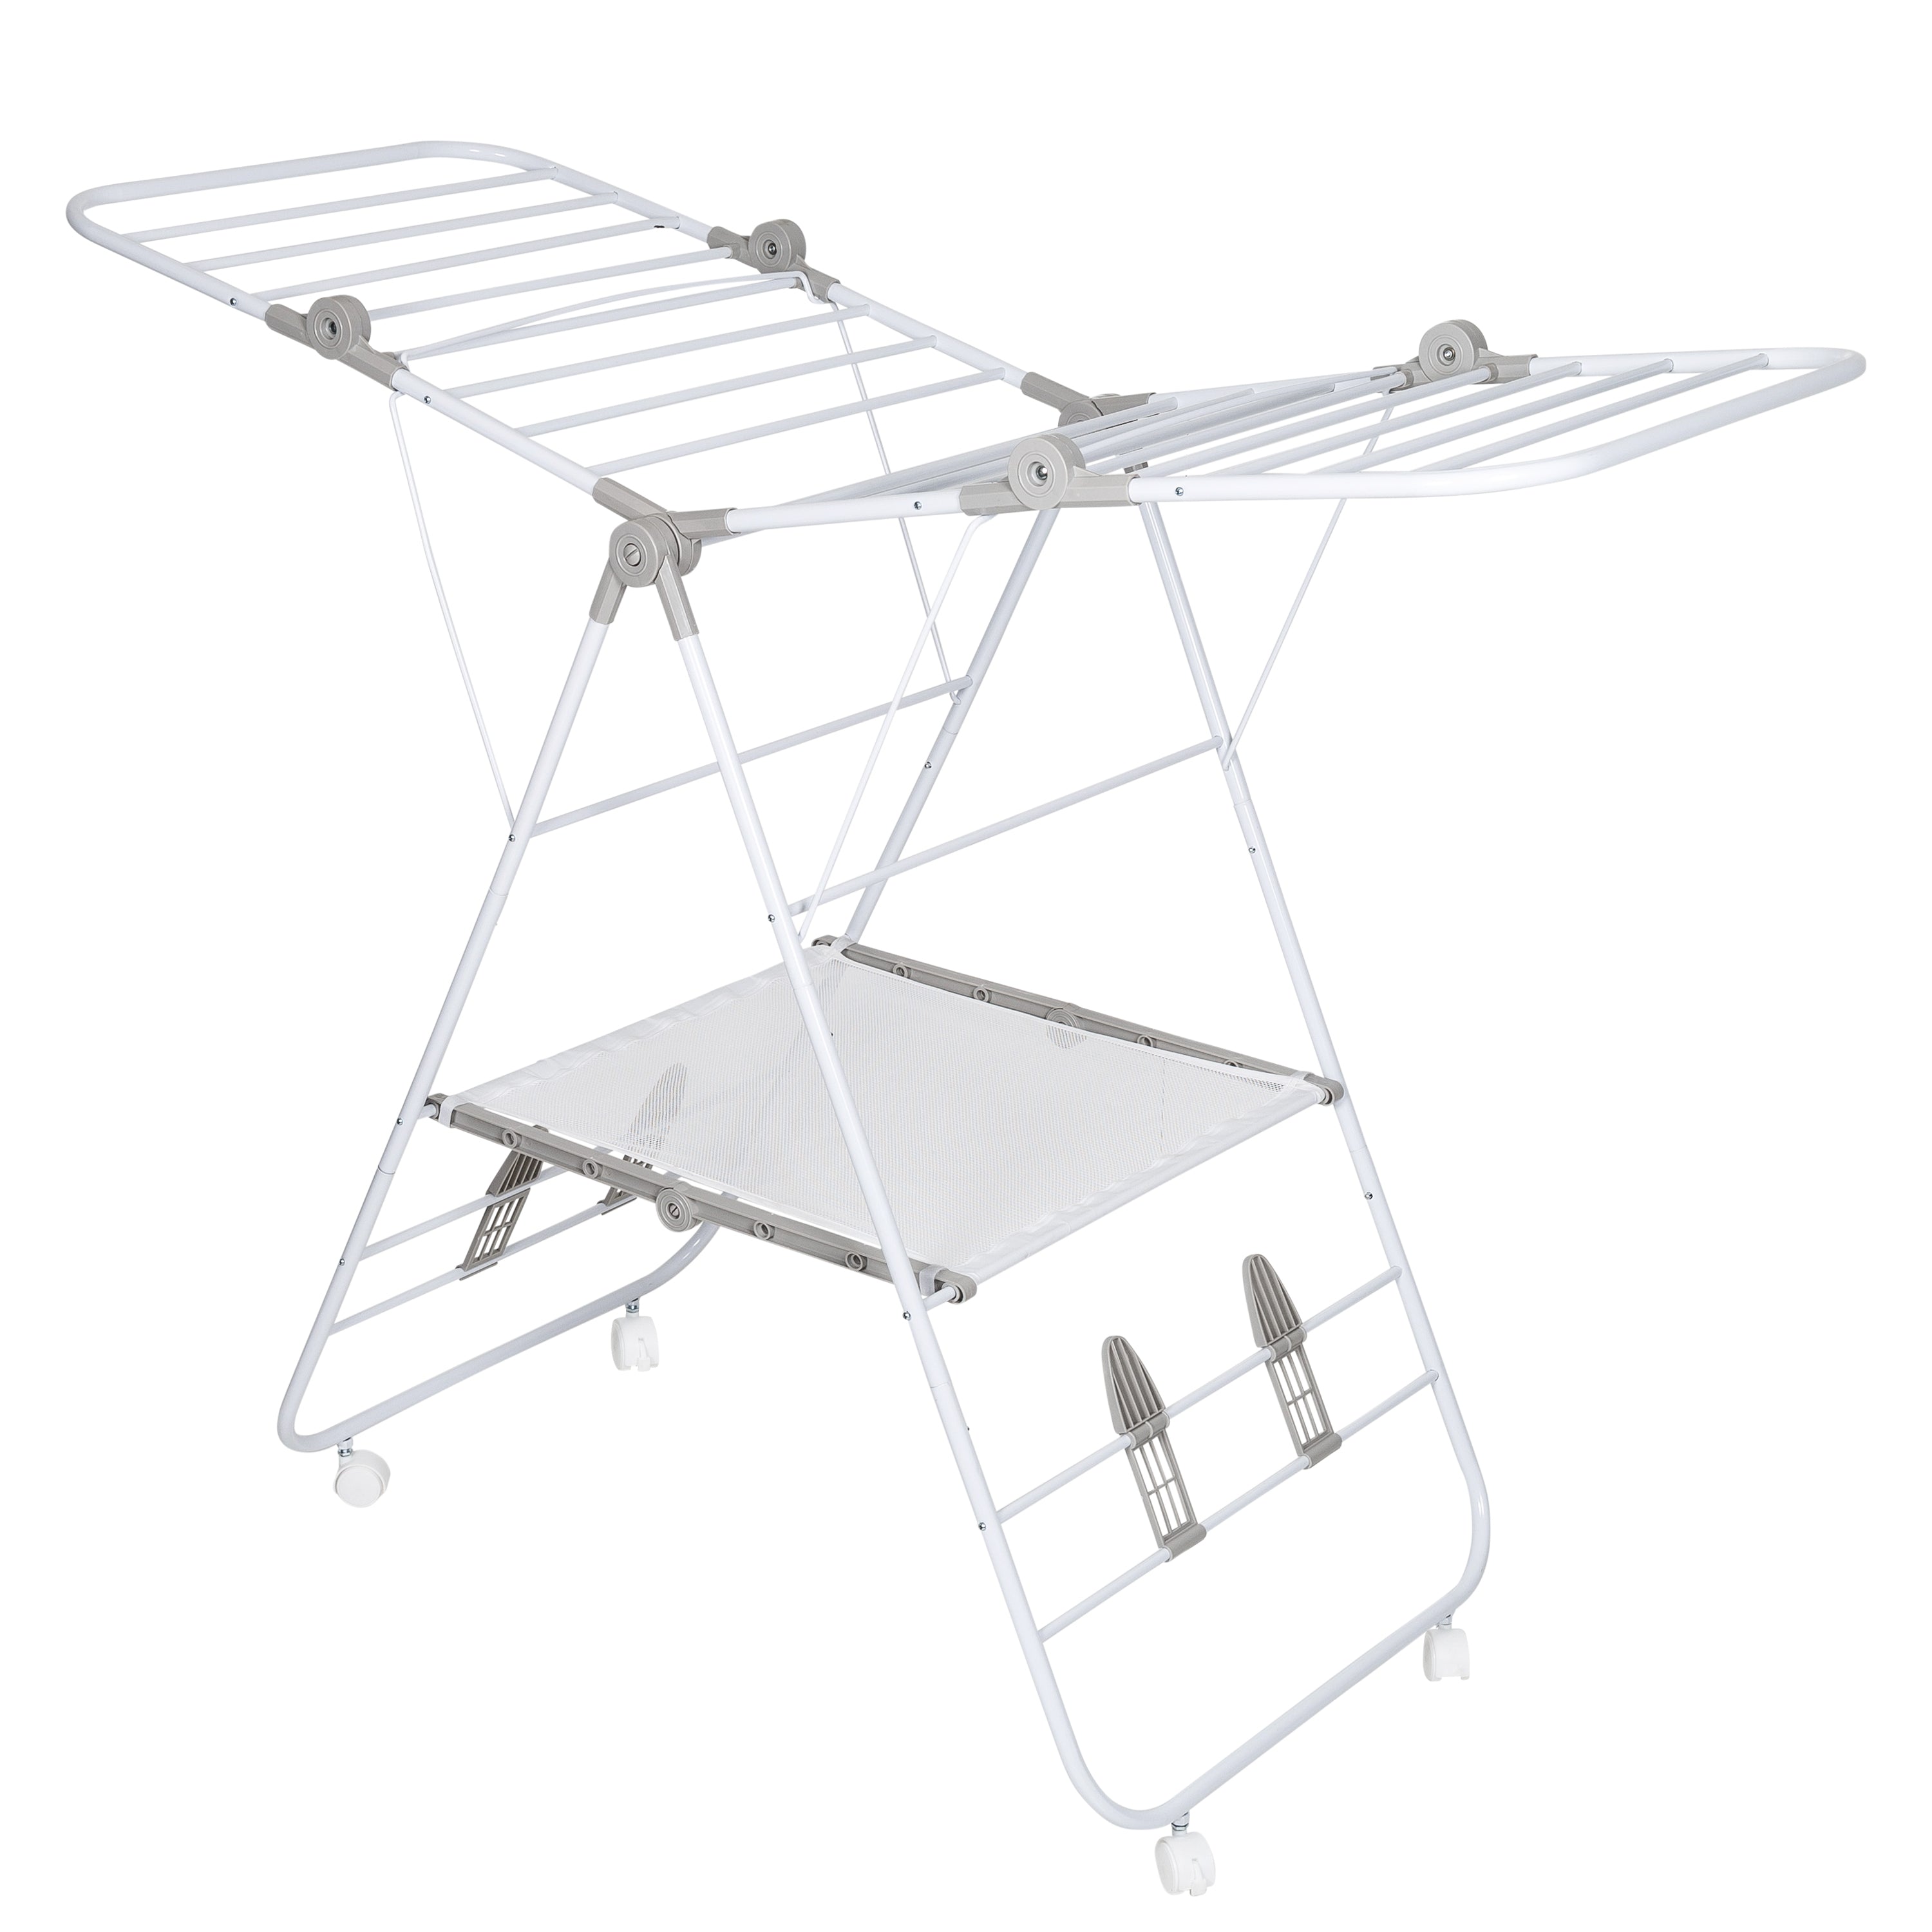 Polder Two-Tier Free Standing Clothes Drying Rack with Mesh Garment Dryer